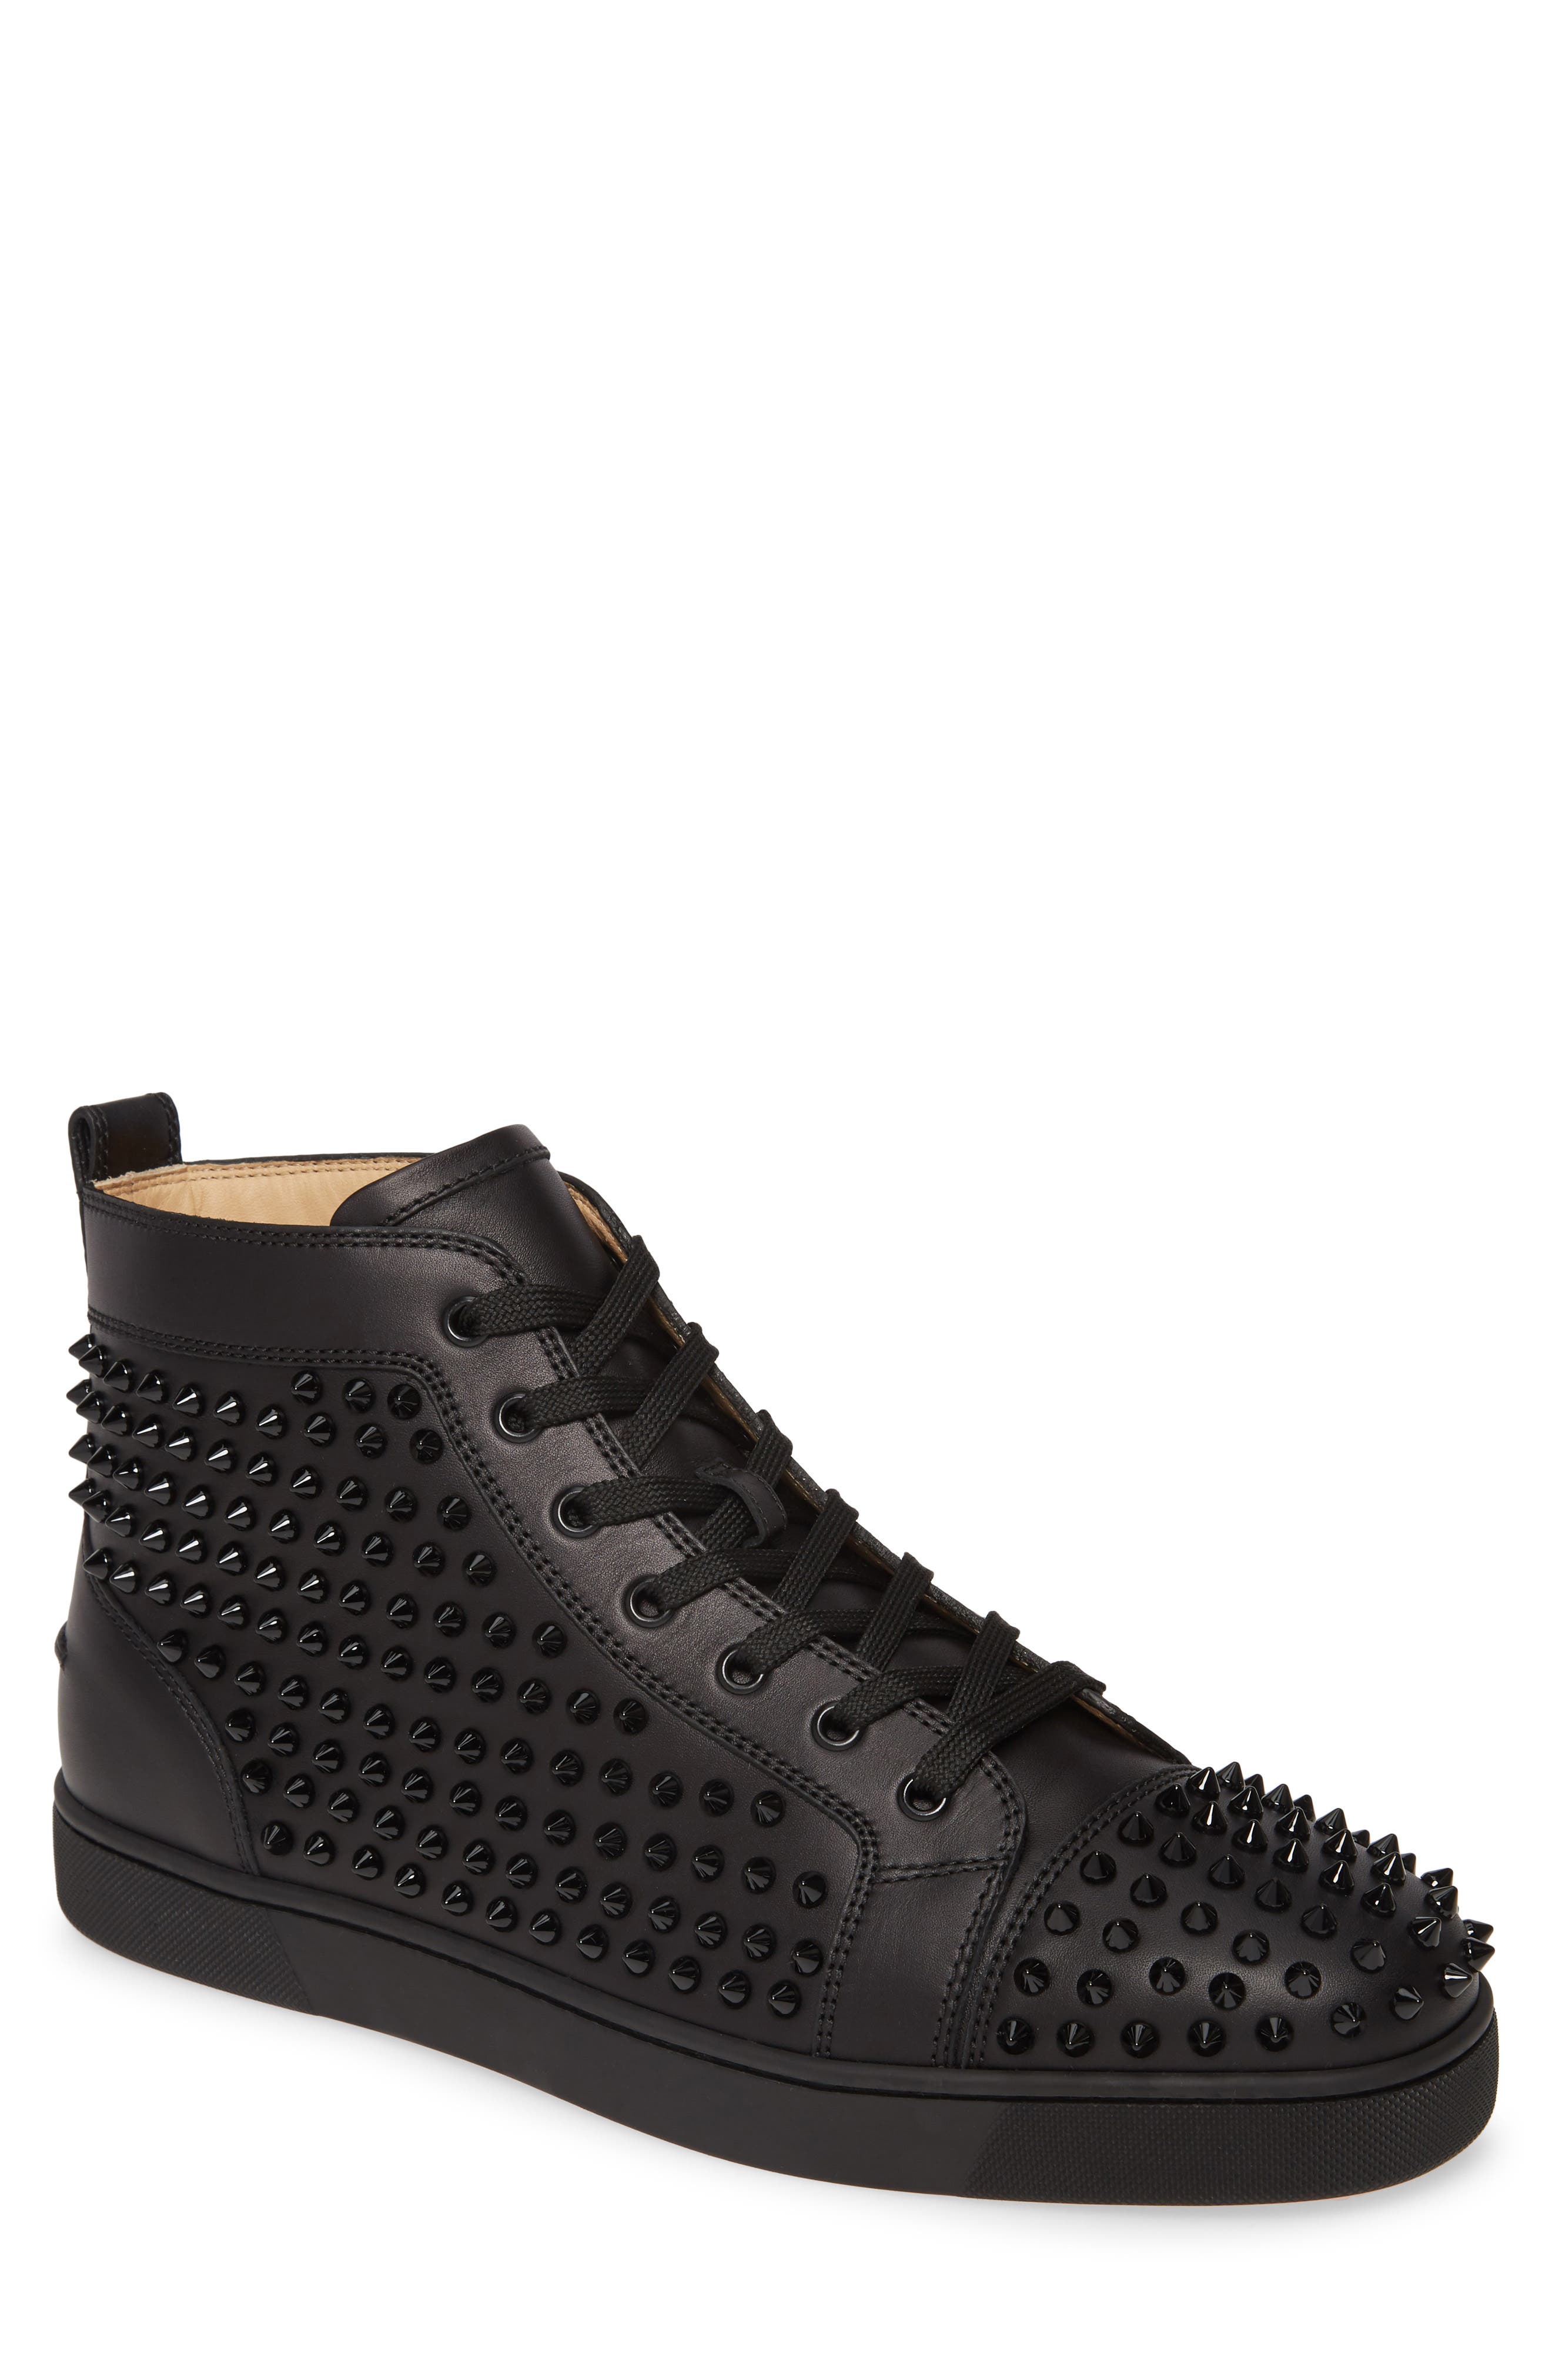 christian louboutin mens shoes for sale